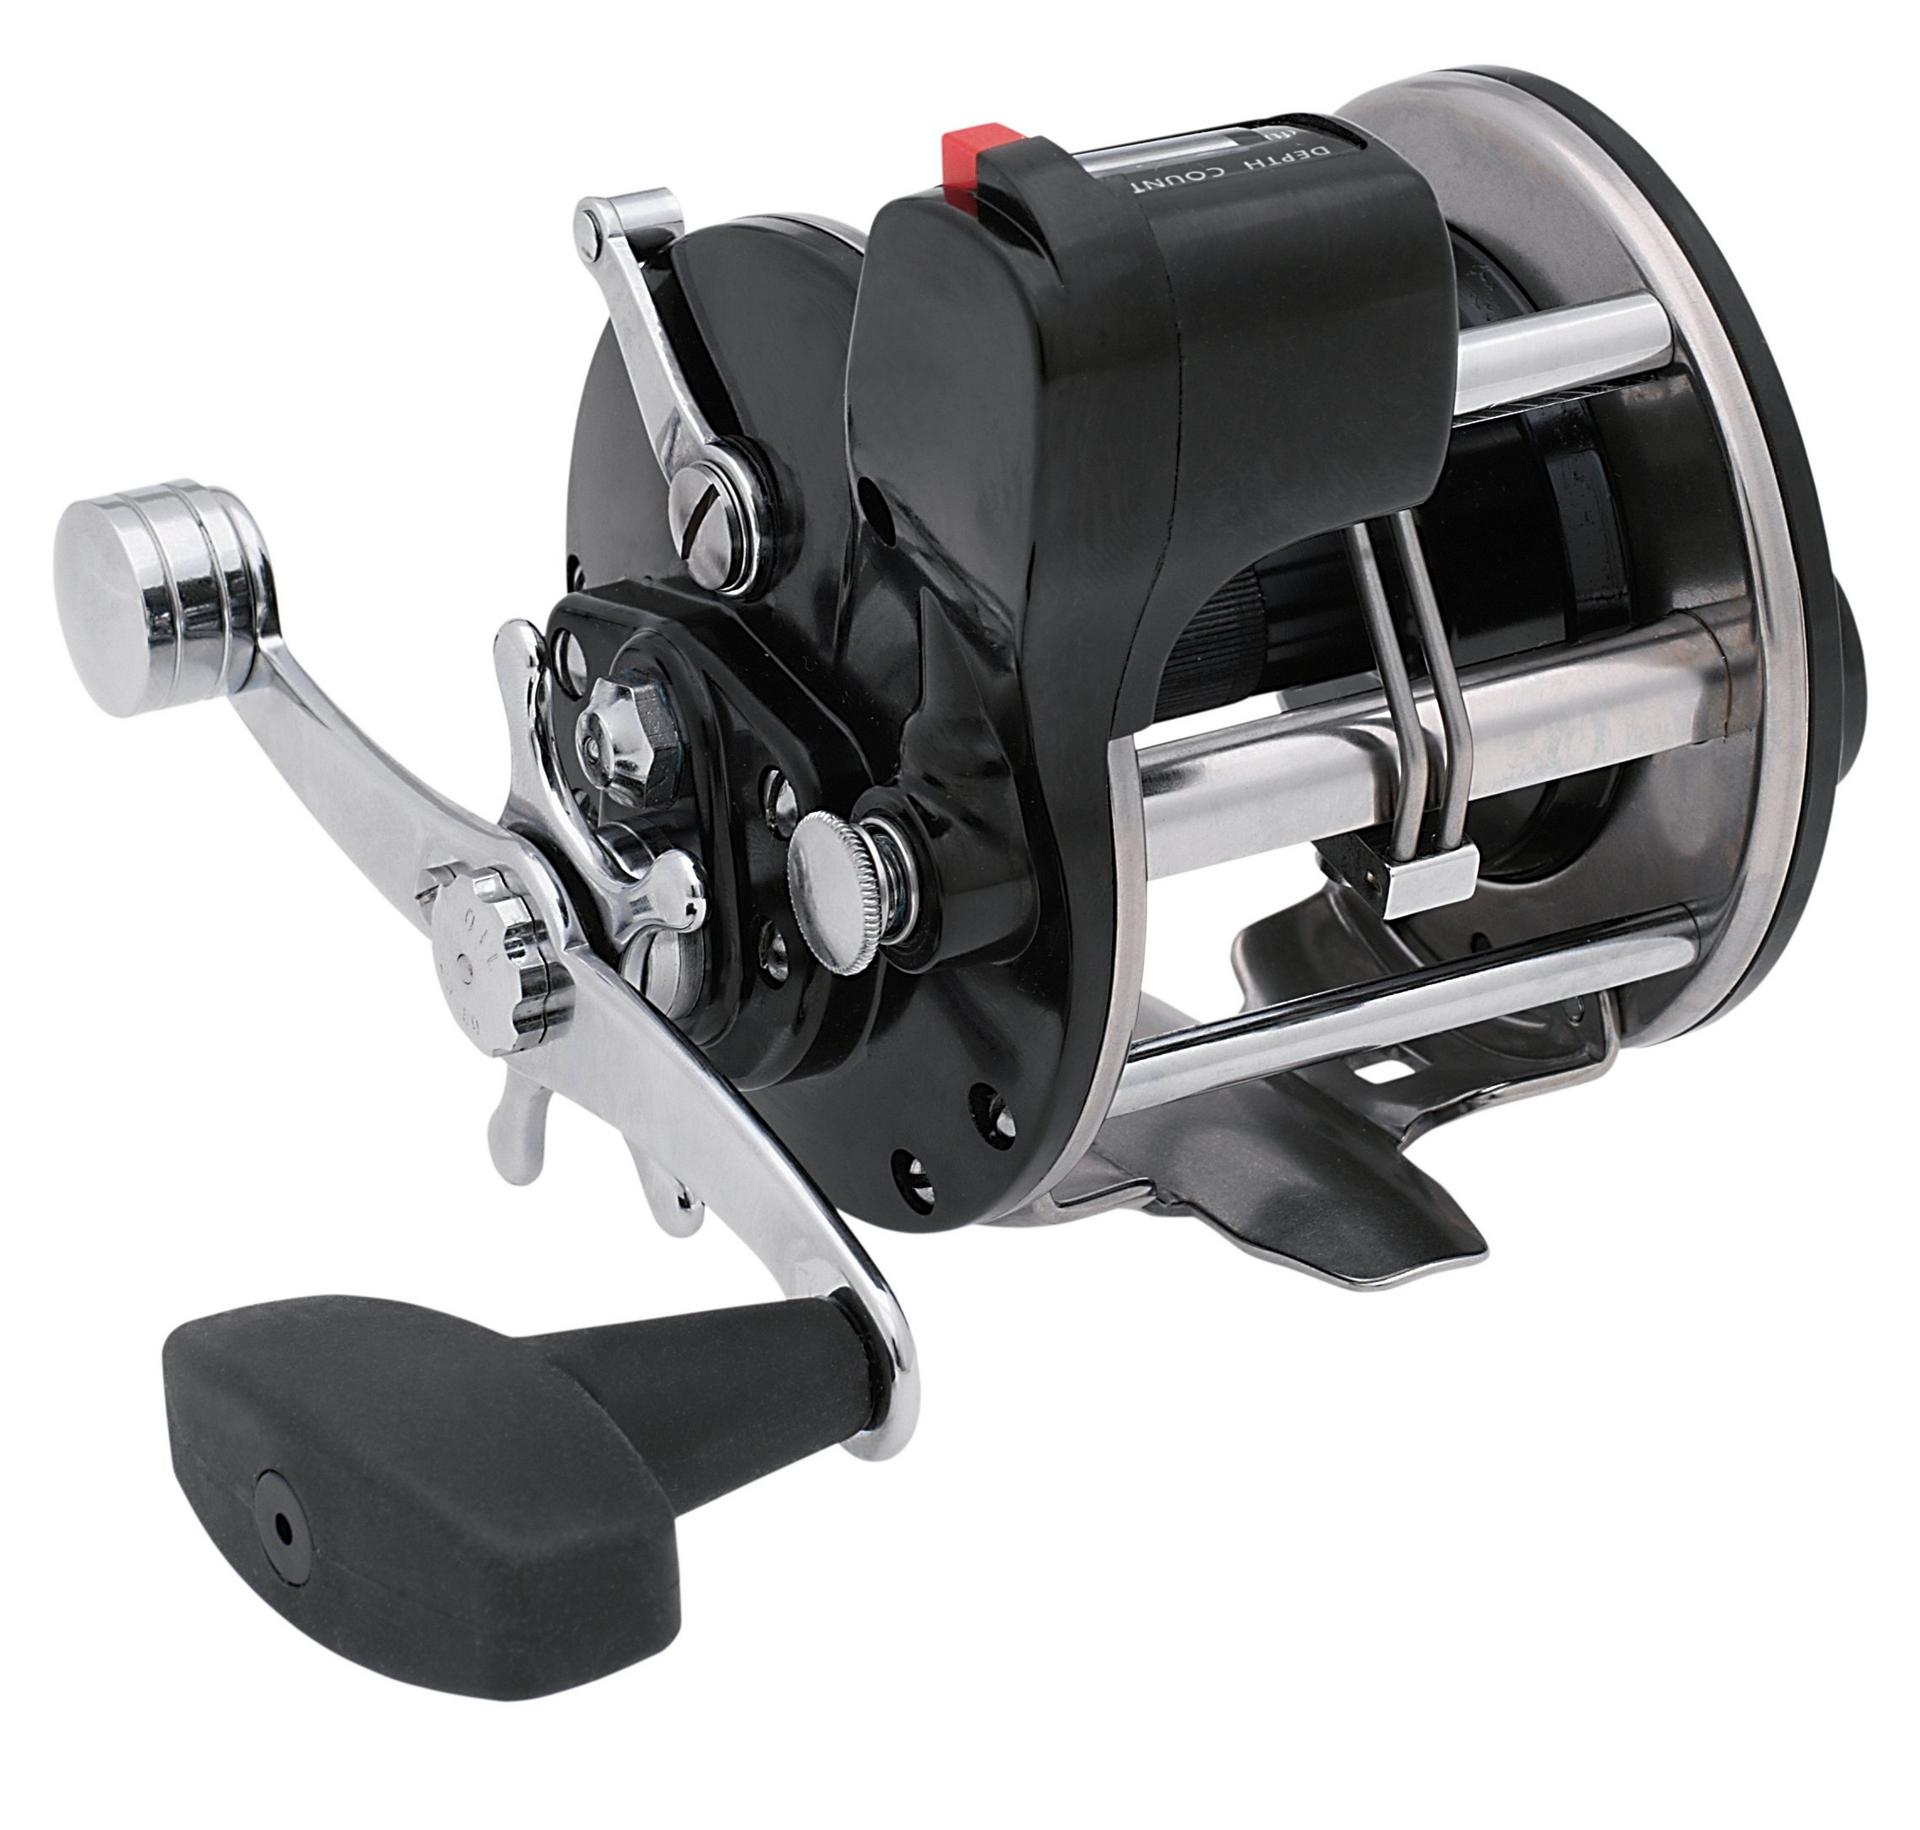 PENN Squall II Level Wind Conventional Reel, Size 30, Right-Hand